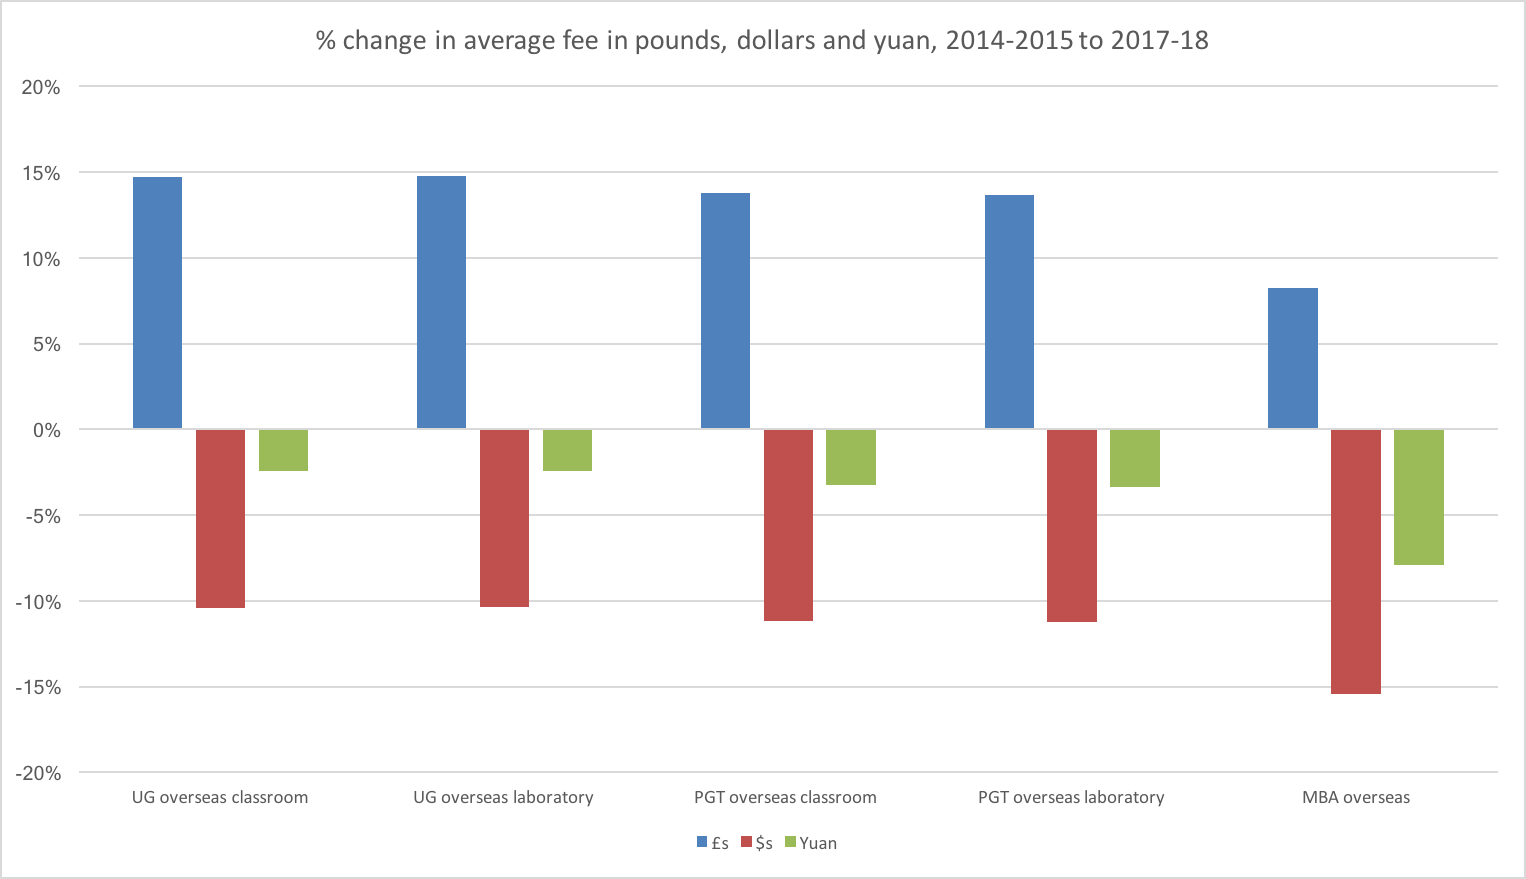 % change in average fee in pounds, dollars and yuan, 2014-2015 to 2017-18